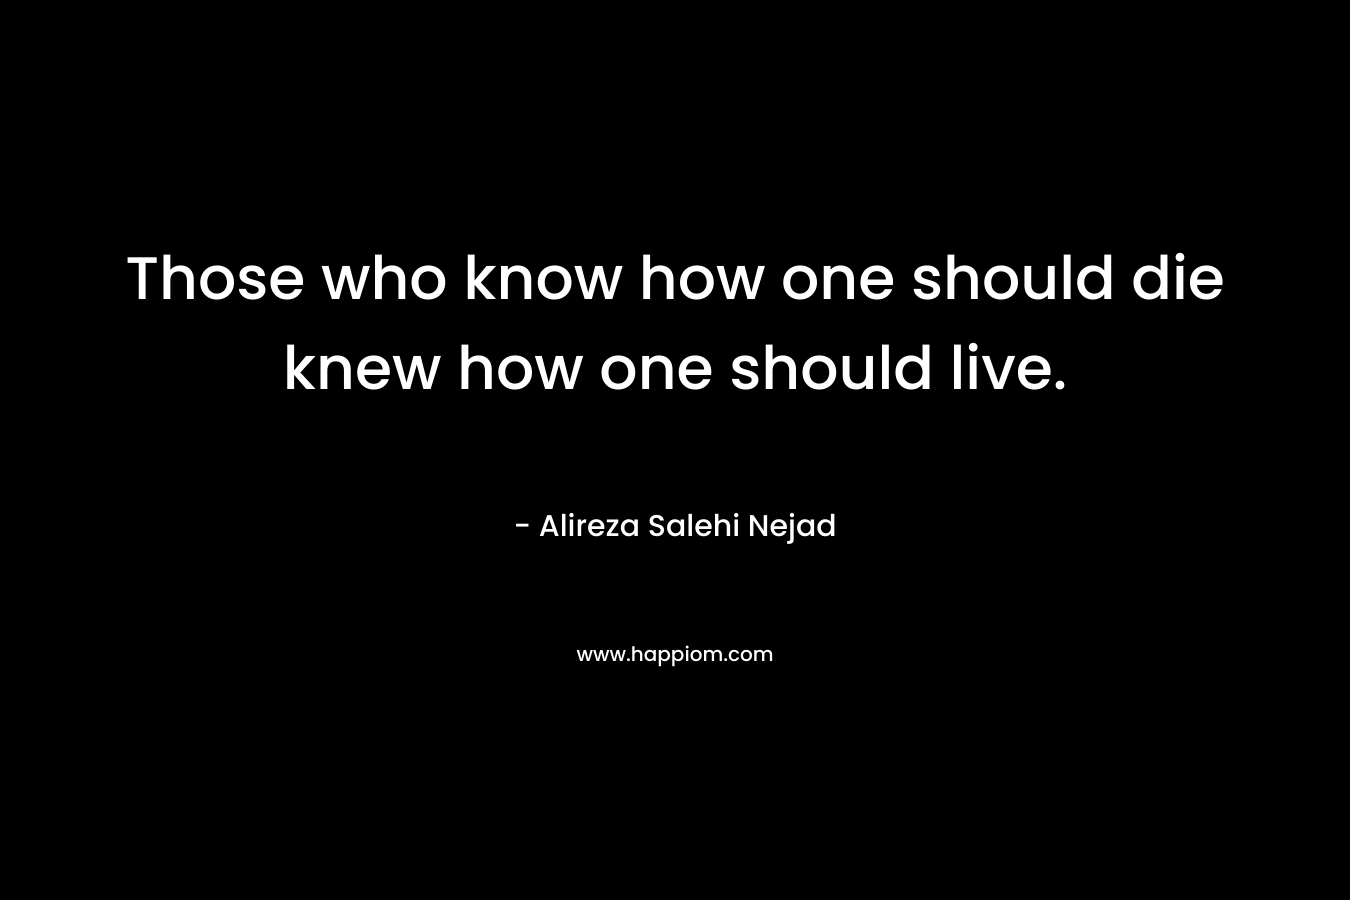 Those who know how one should die knew how one should live.